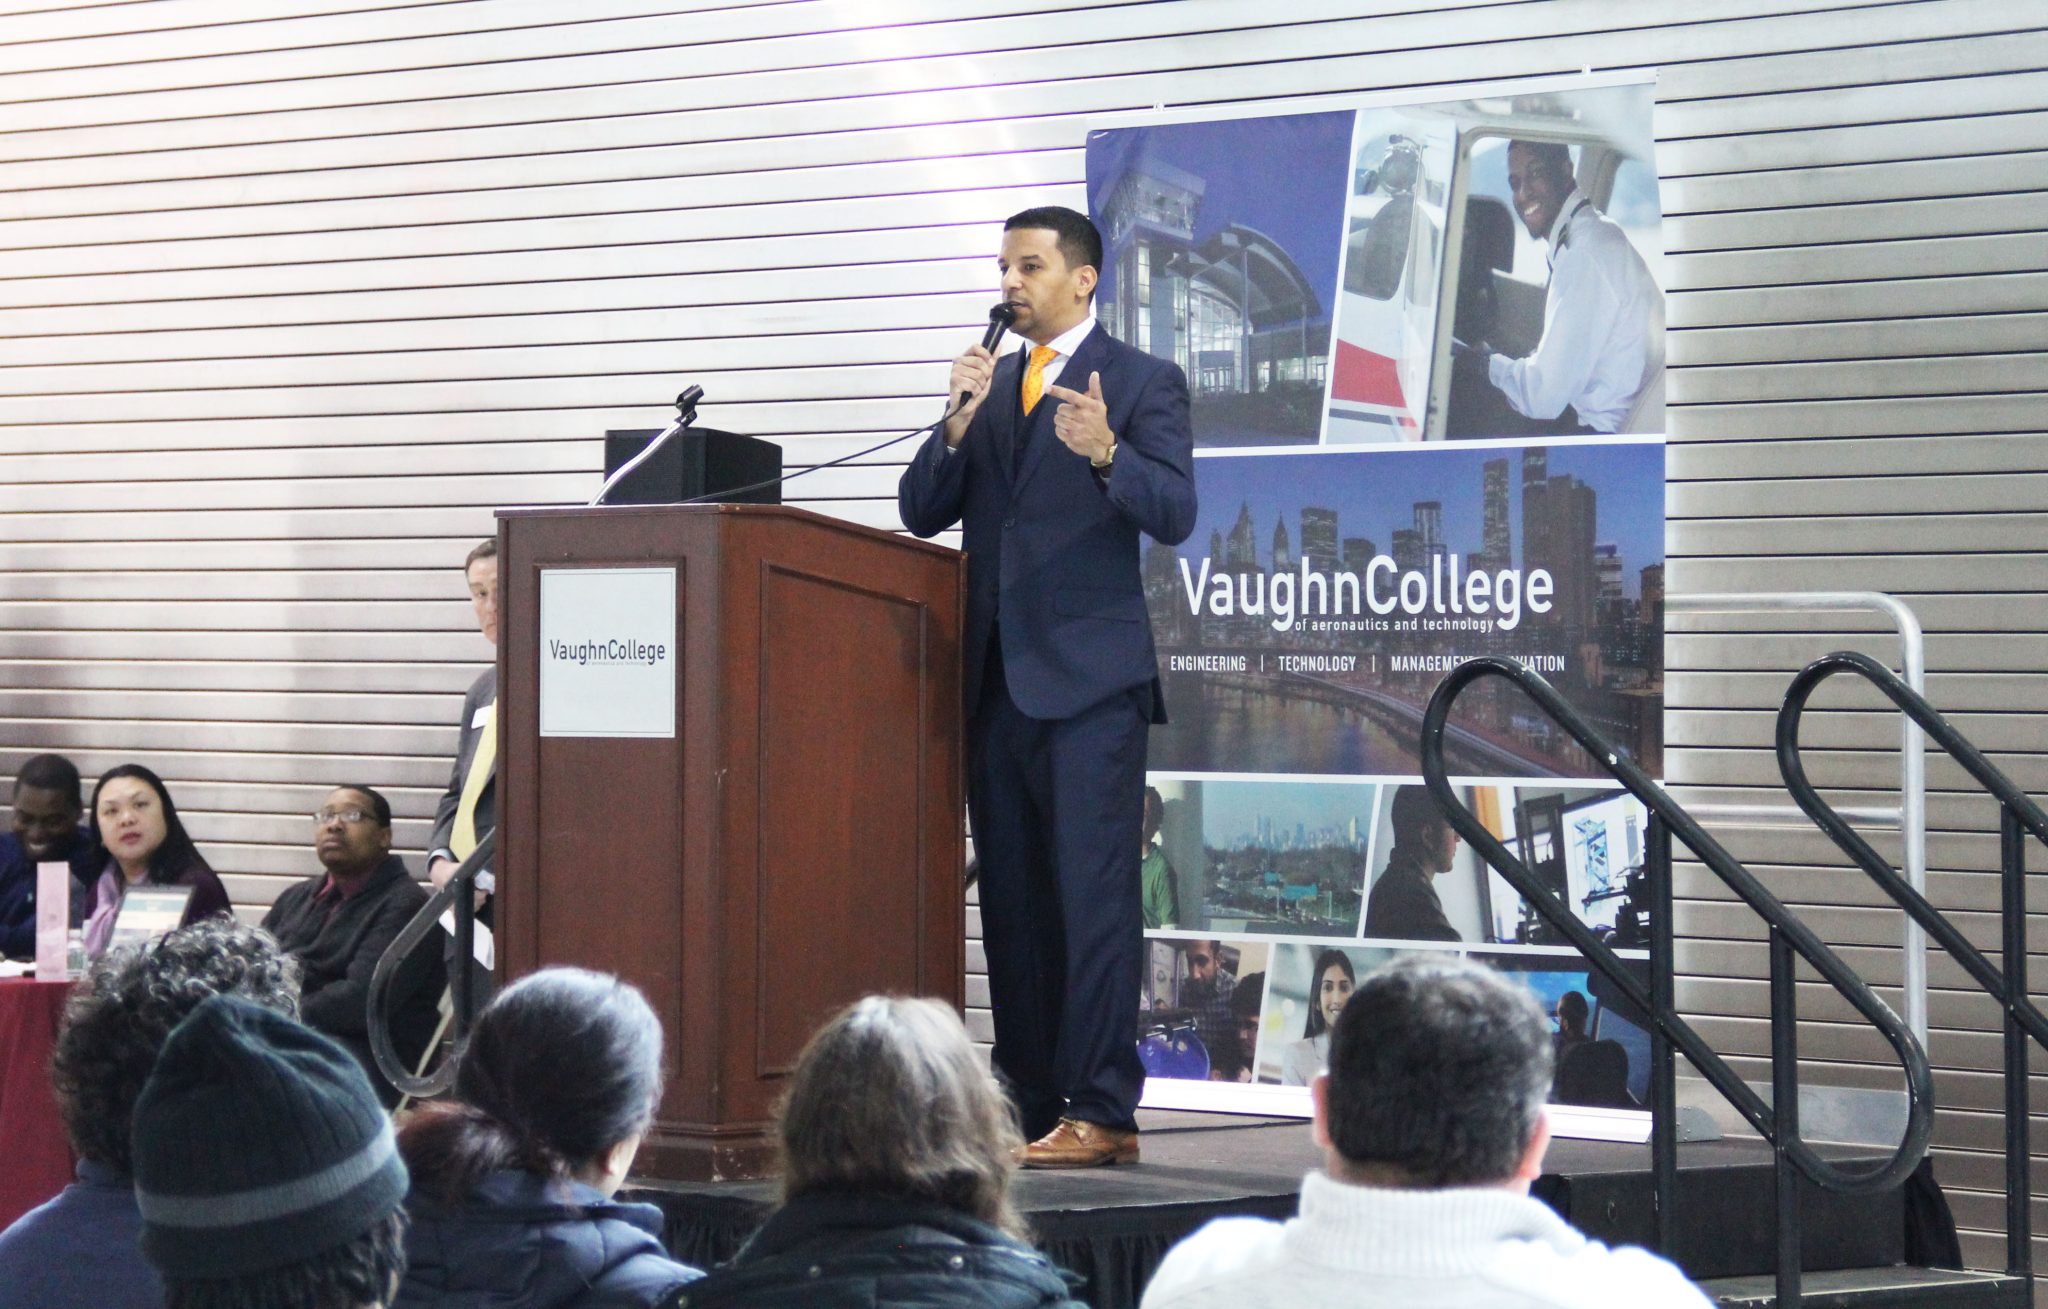 Career Success and Upward Mobility Emphasized at Vaughn’s Open House